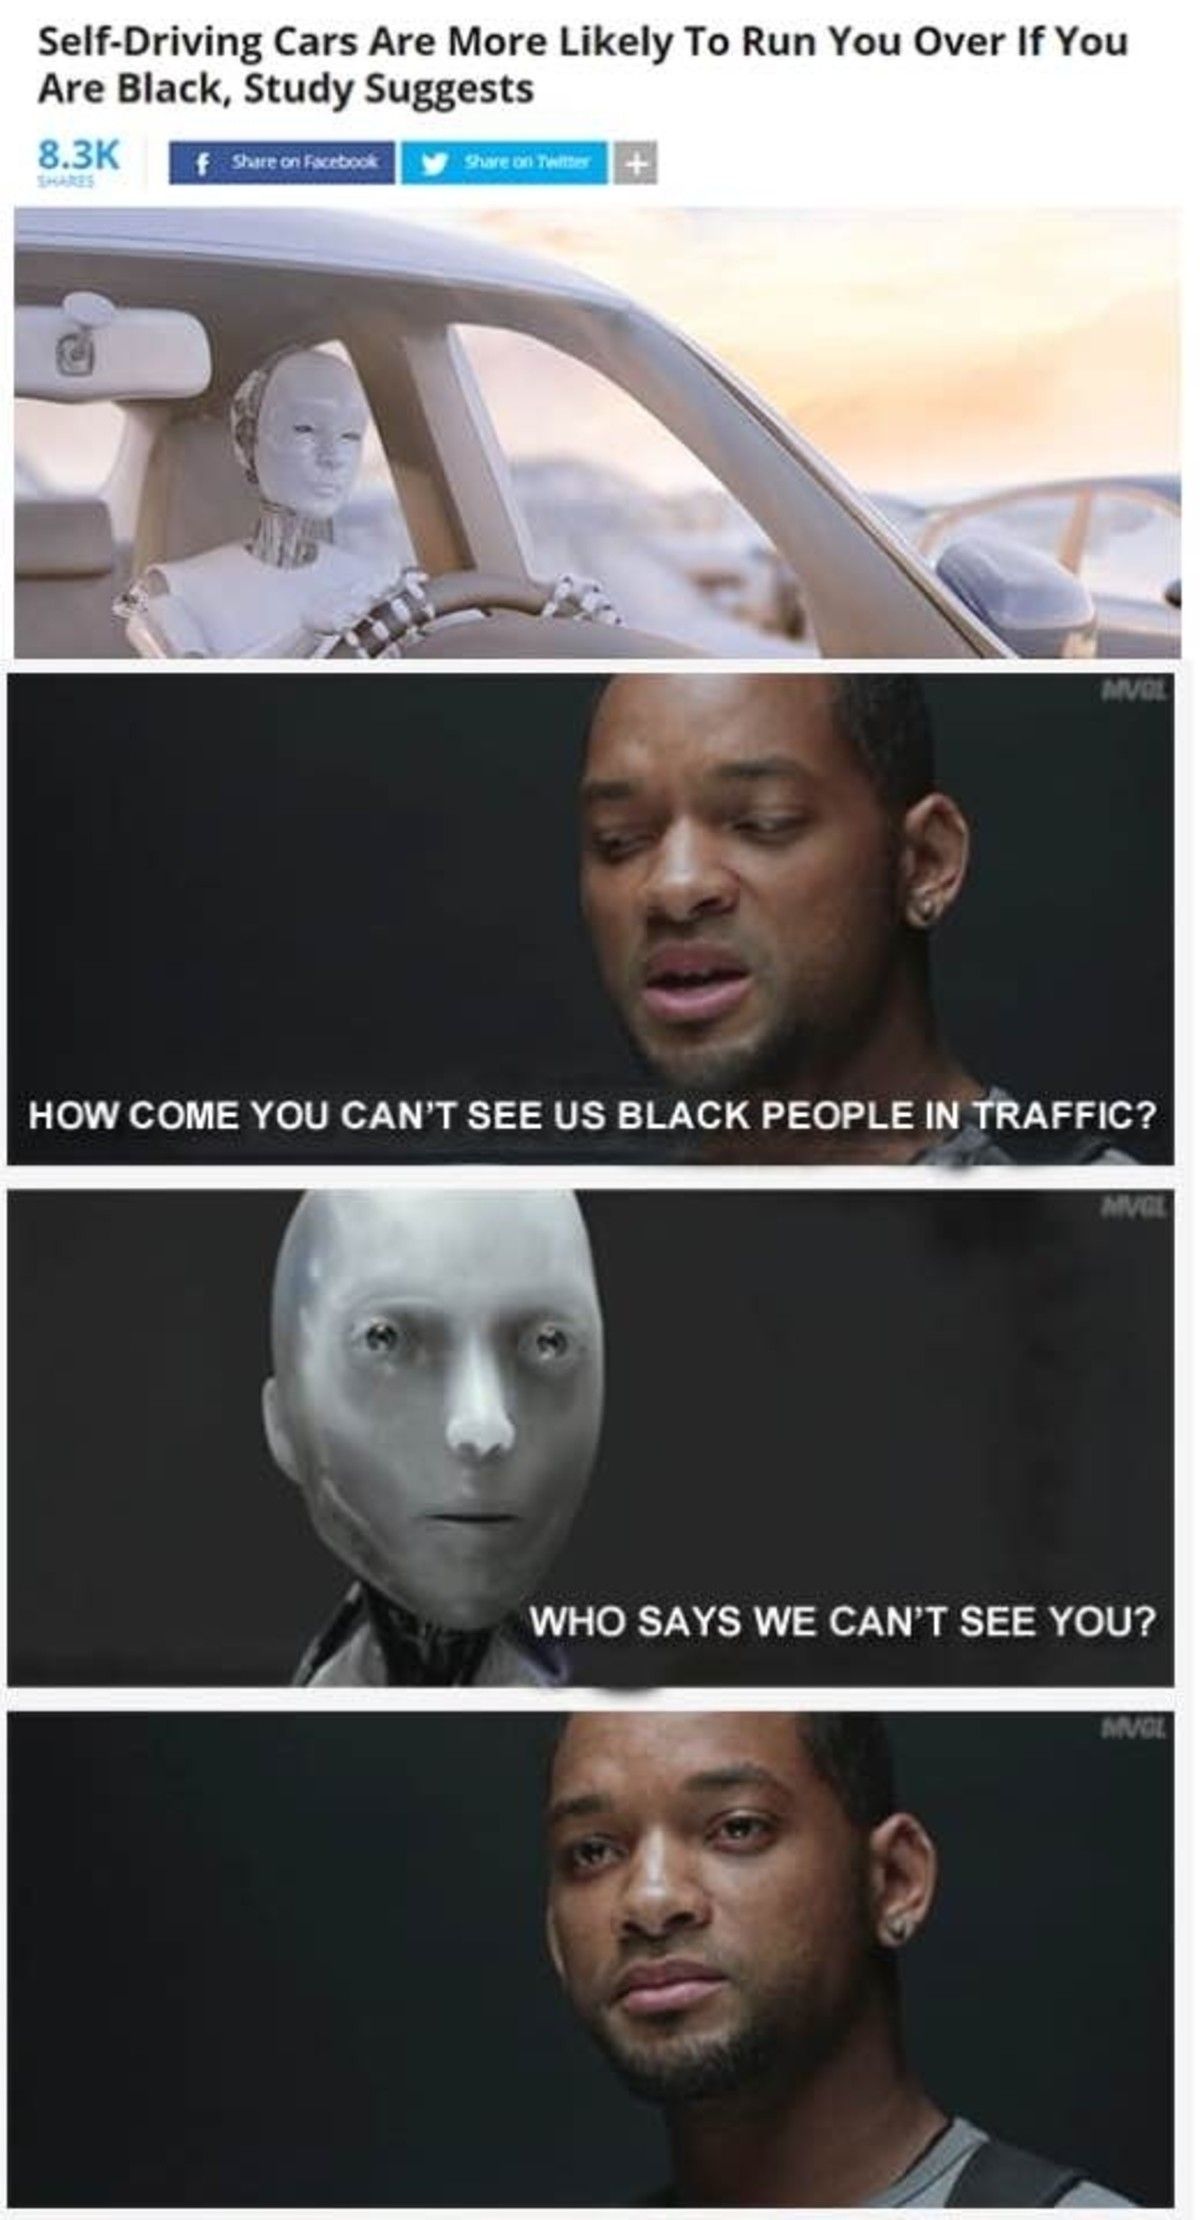 Well what can I say, the robots are white afterall